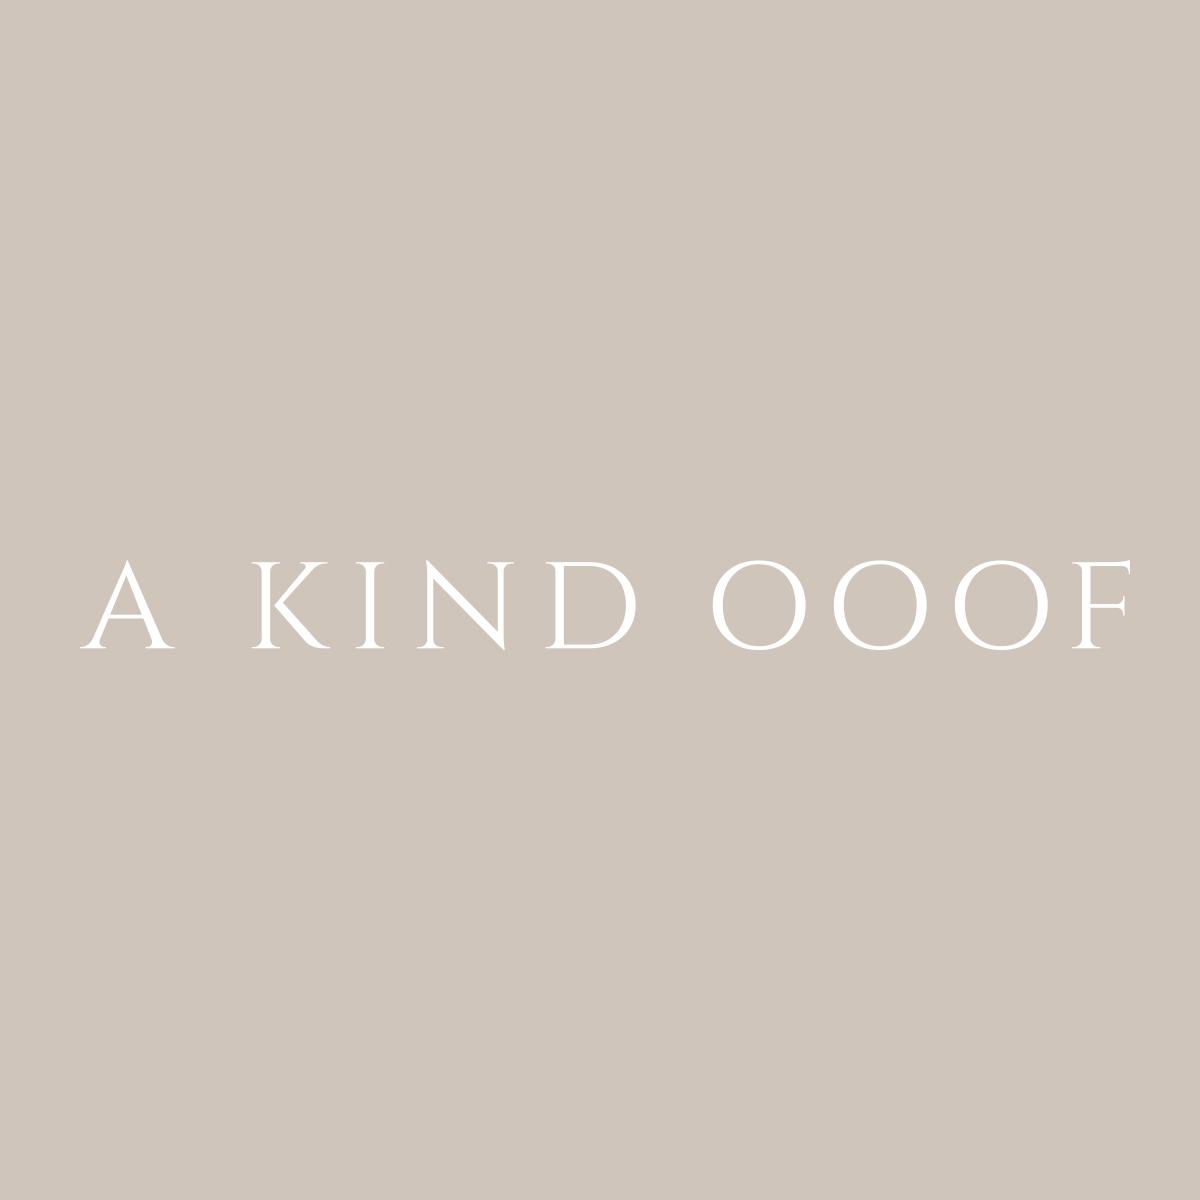 A KIND OOOF's images